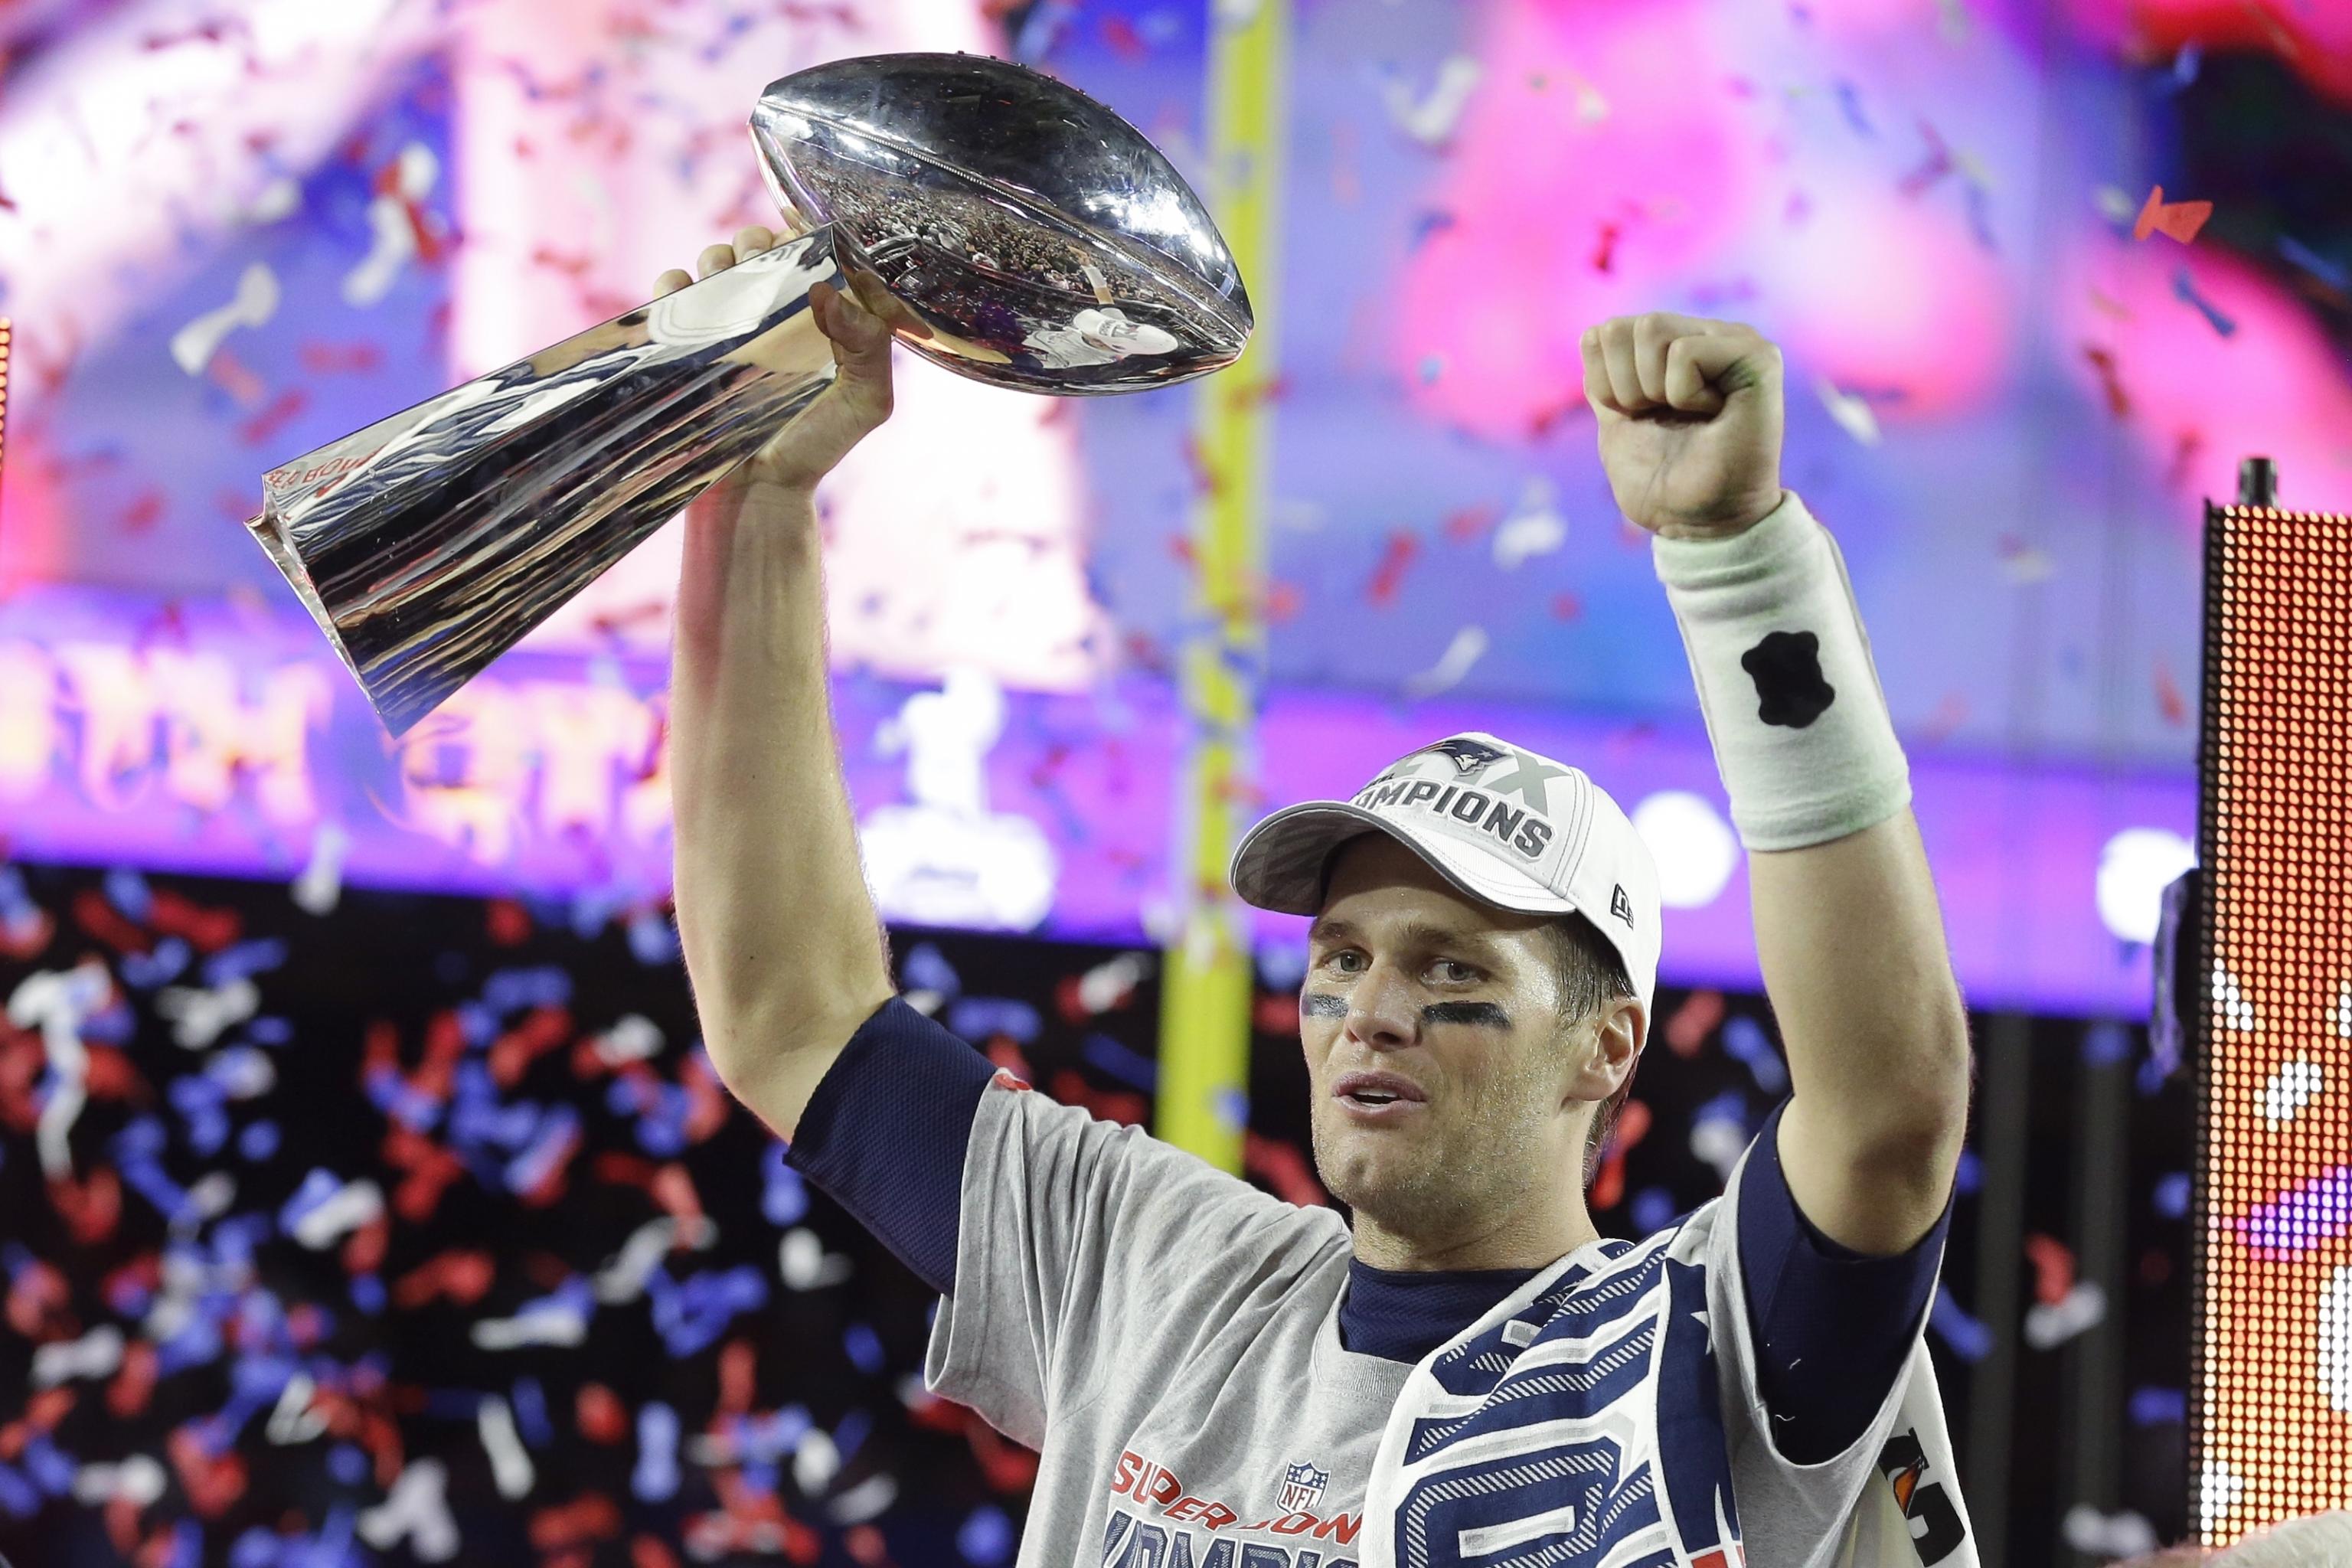 Super Bowl 2015 rosters: Patriots, Seahawks loaded with talent